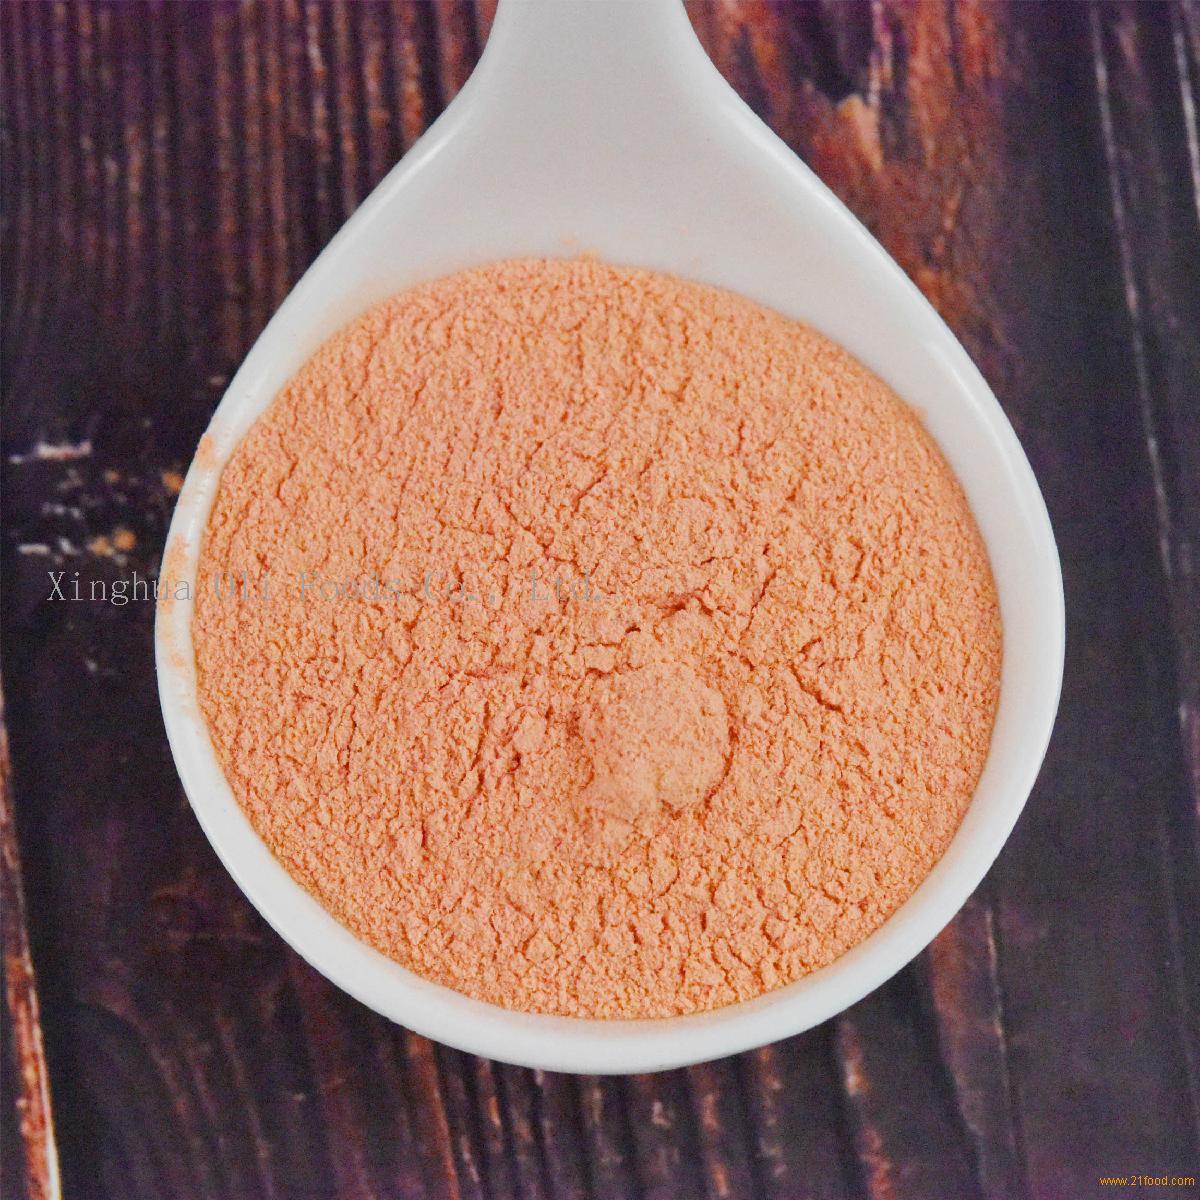 Dehydrated carrot powder